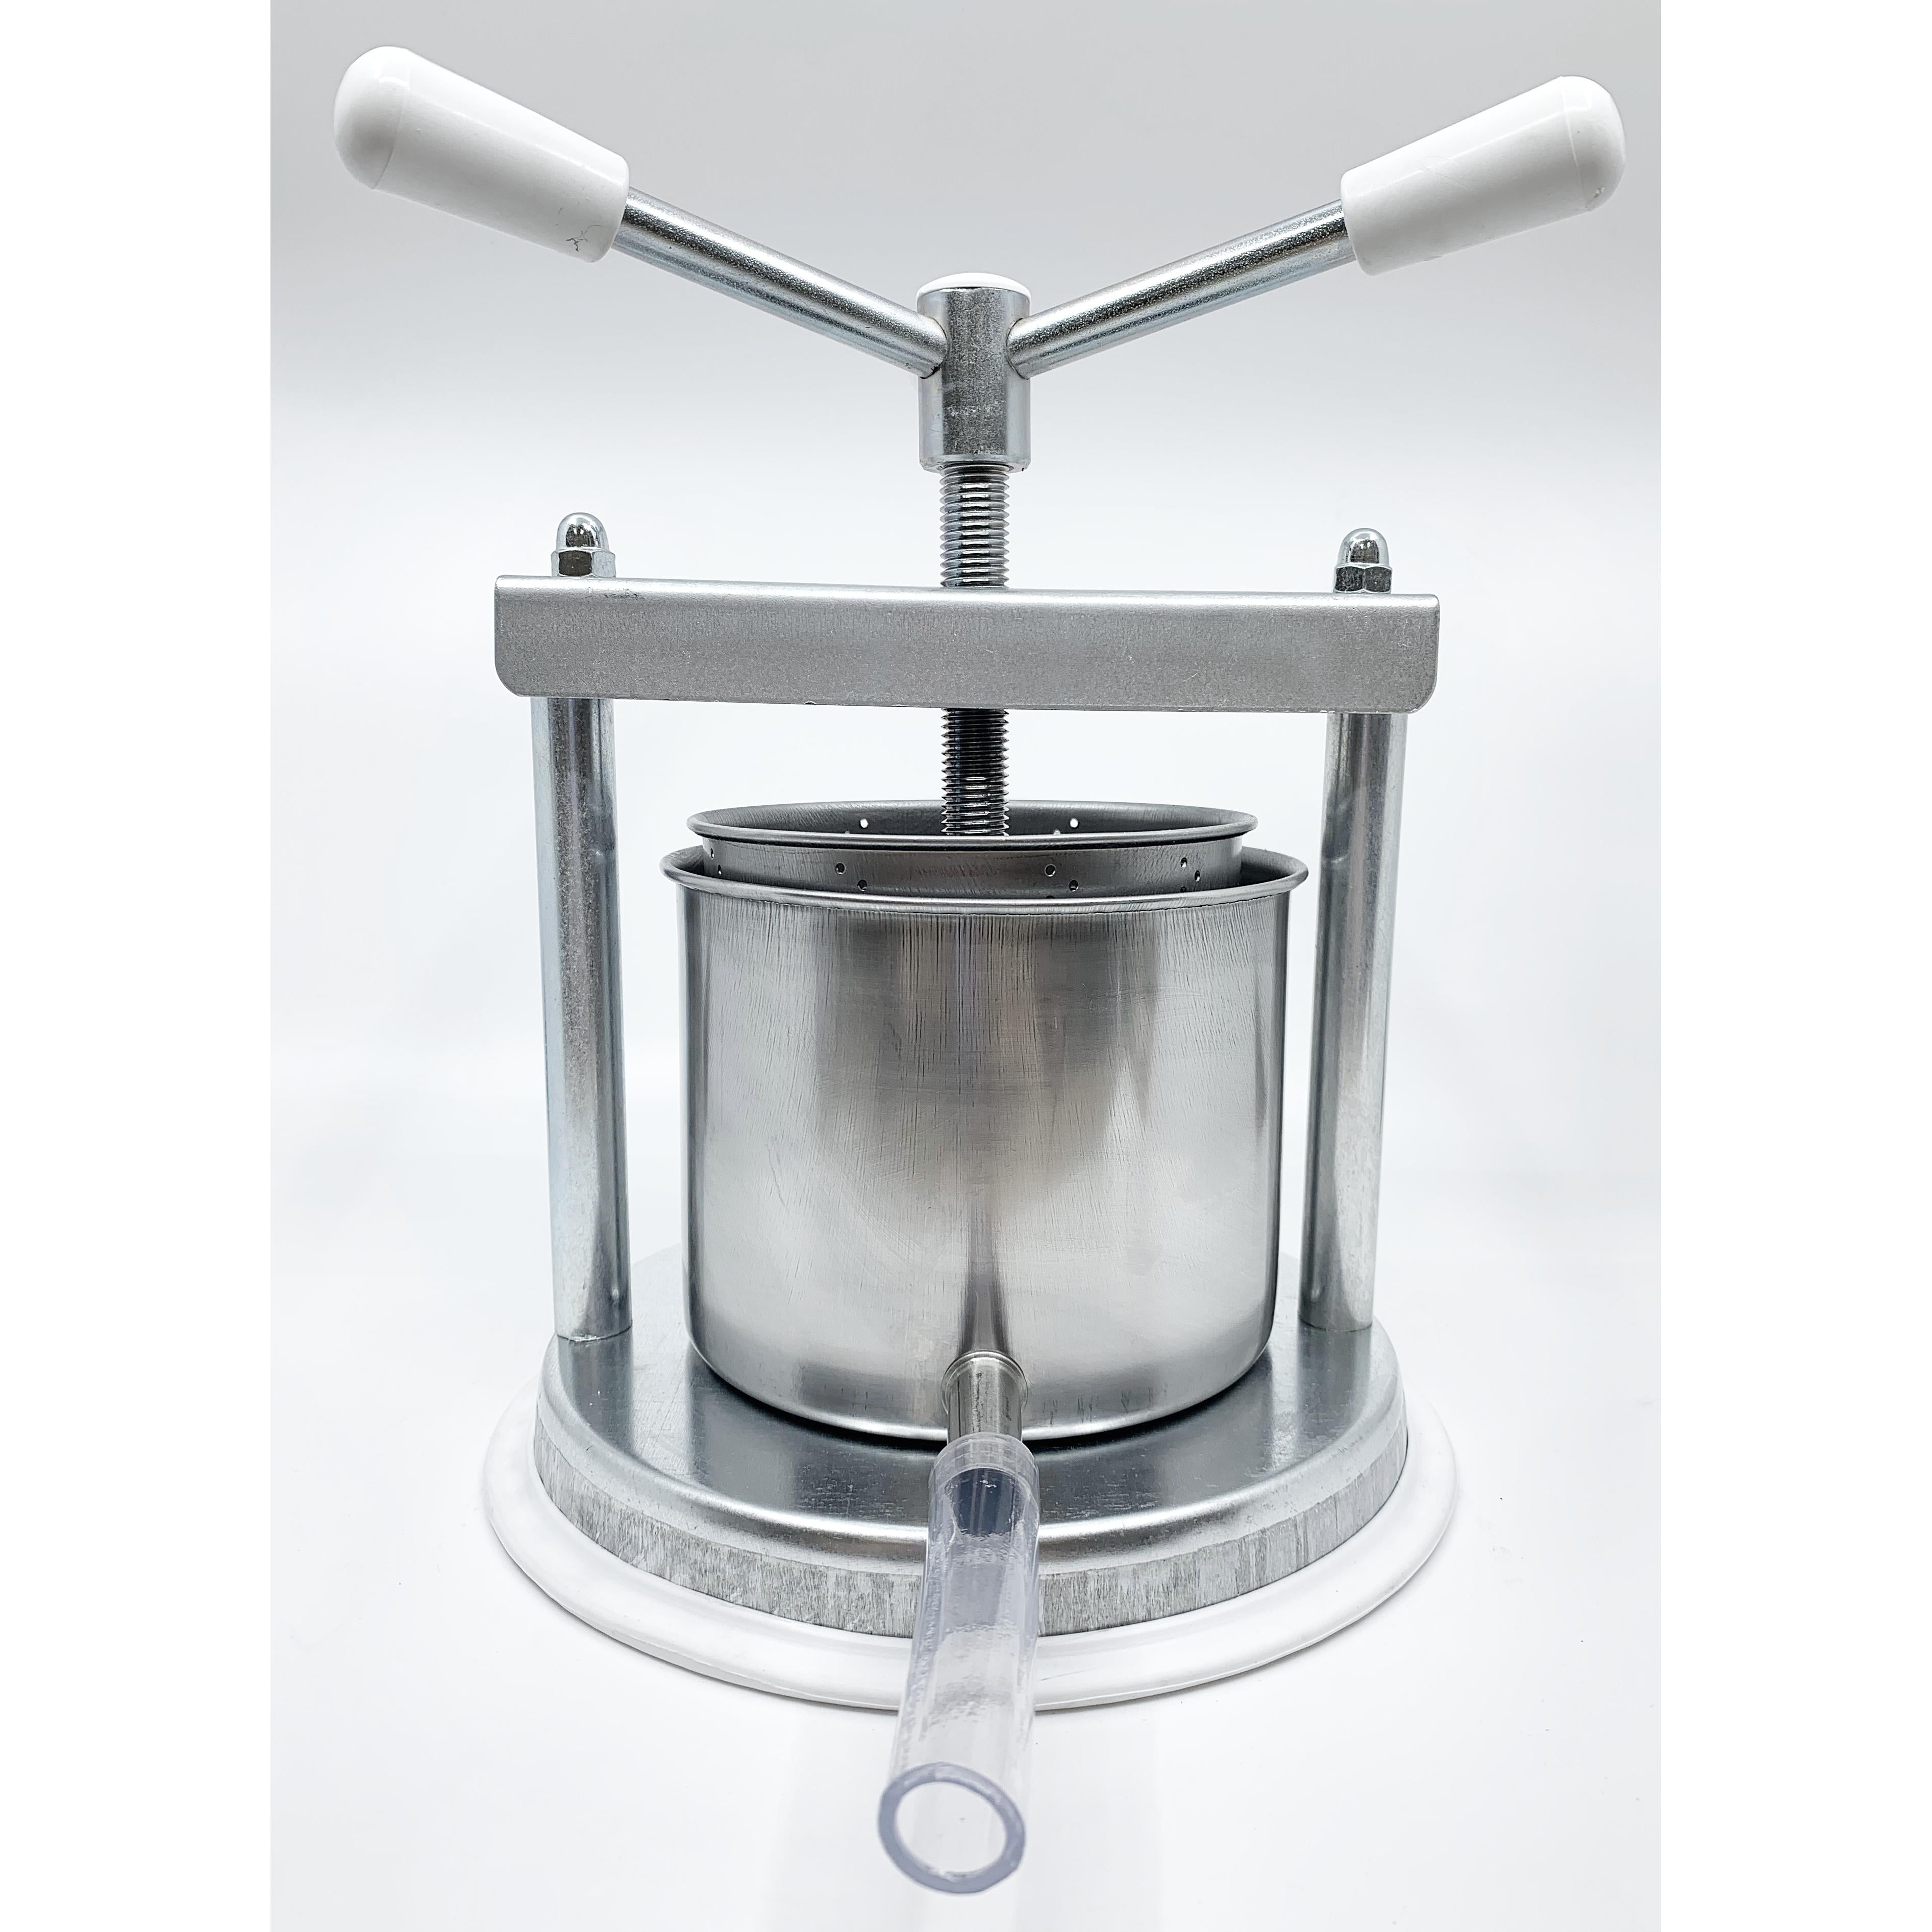 Small Professional Galvanized Vegetable / Fruit Press 5" - 2 Litre Torchietto Made in Italy for Pressing Fruits, Vegetables, Berries and Tinctures with Spout USA